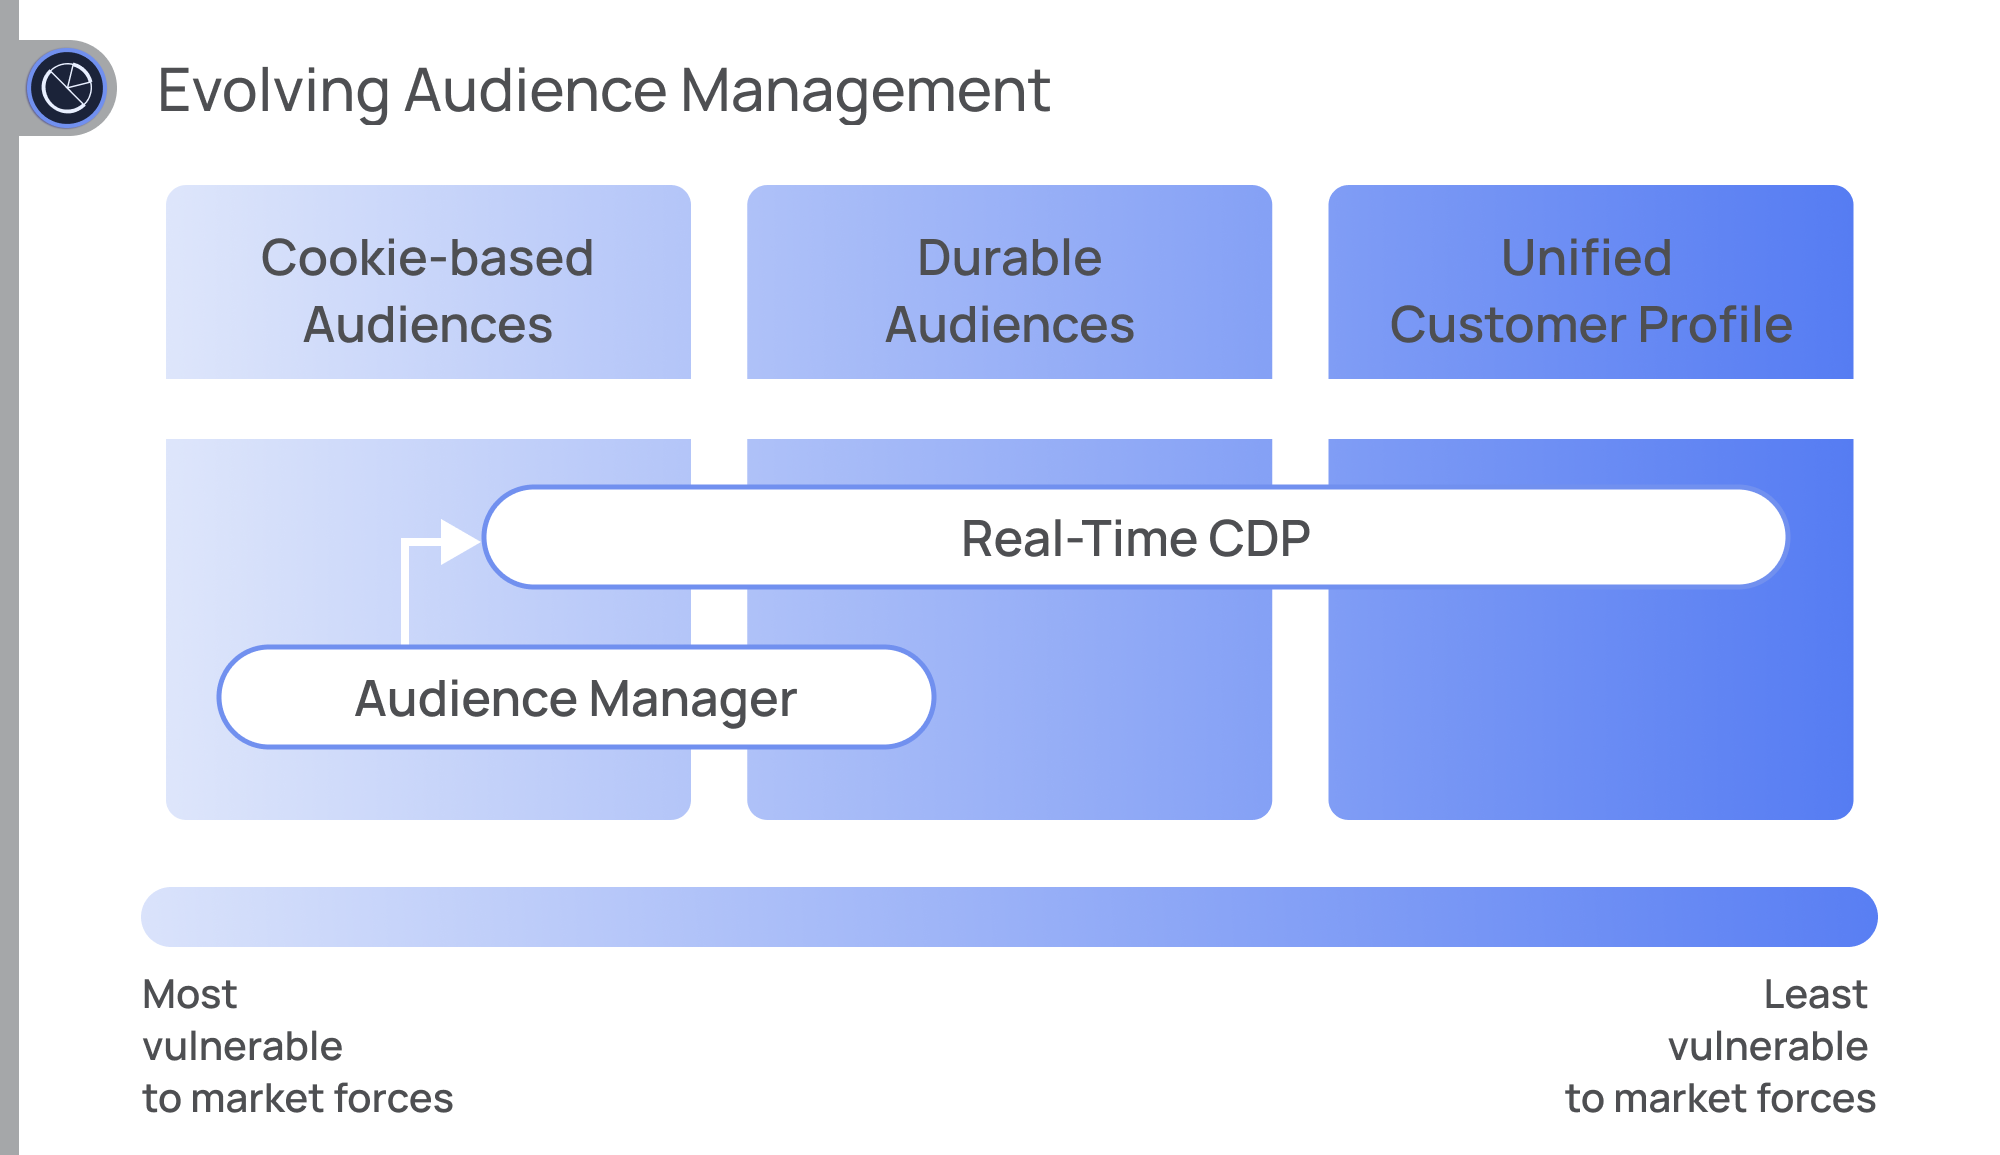 Moving from cookie-based audiences to unified customer profiles